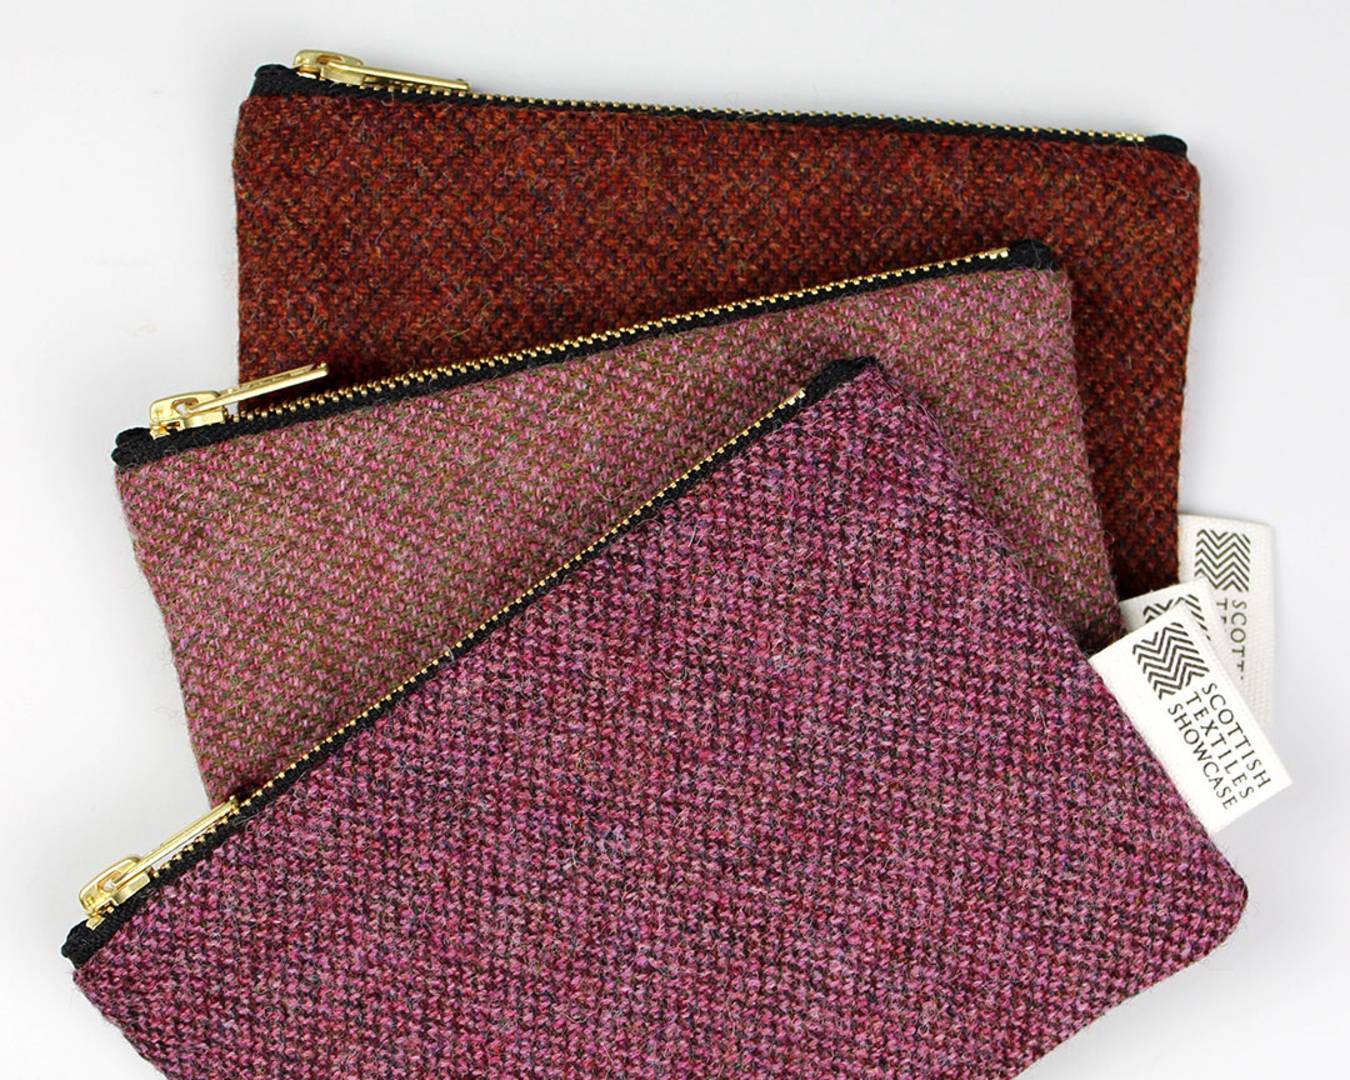 Borders tweed coin purses in a range of colours. ,© Scottish Textiles Showcase